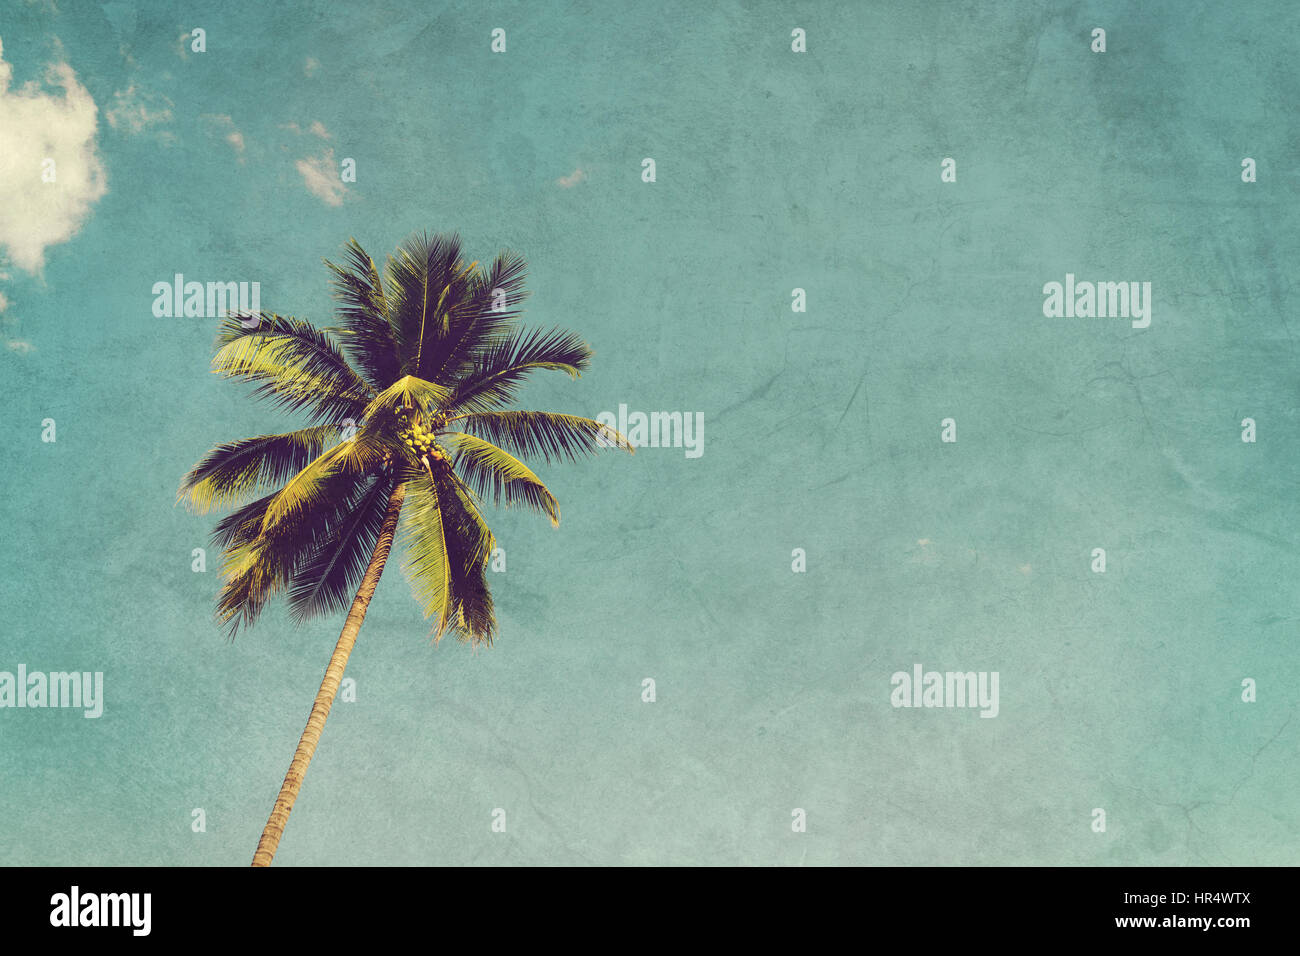 Coconut palm trees and shining sun with vintage effect. Stock Photo